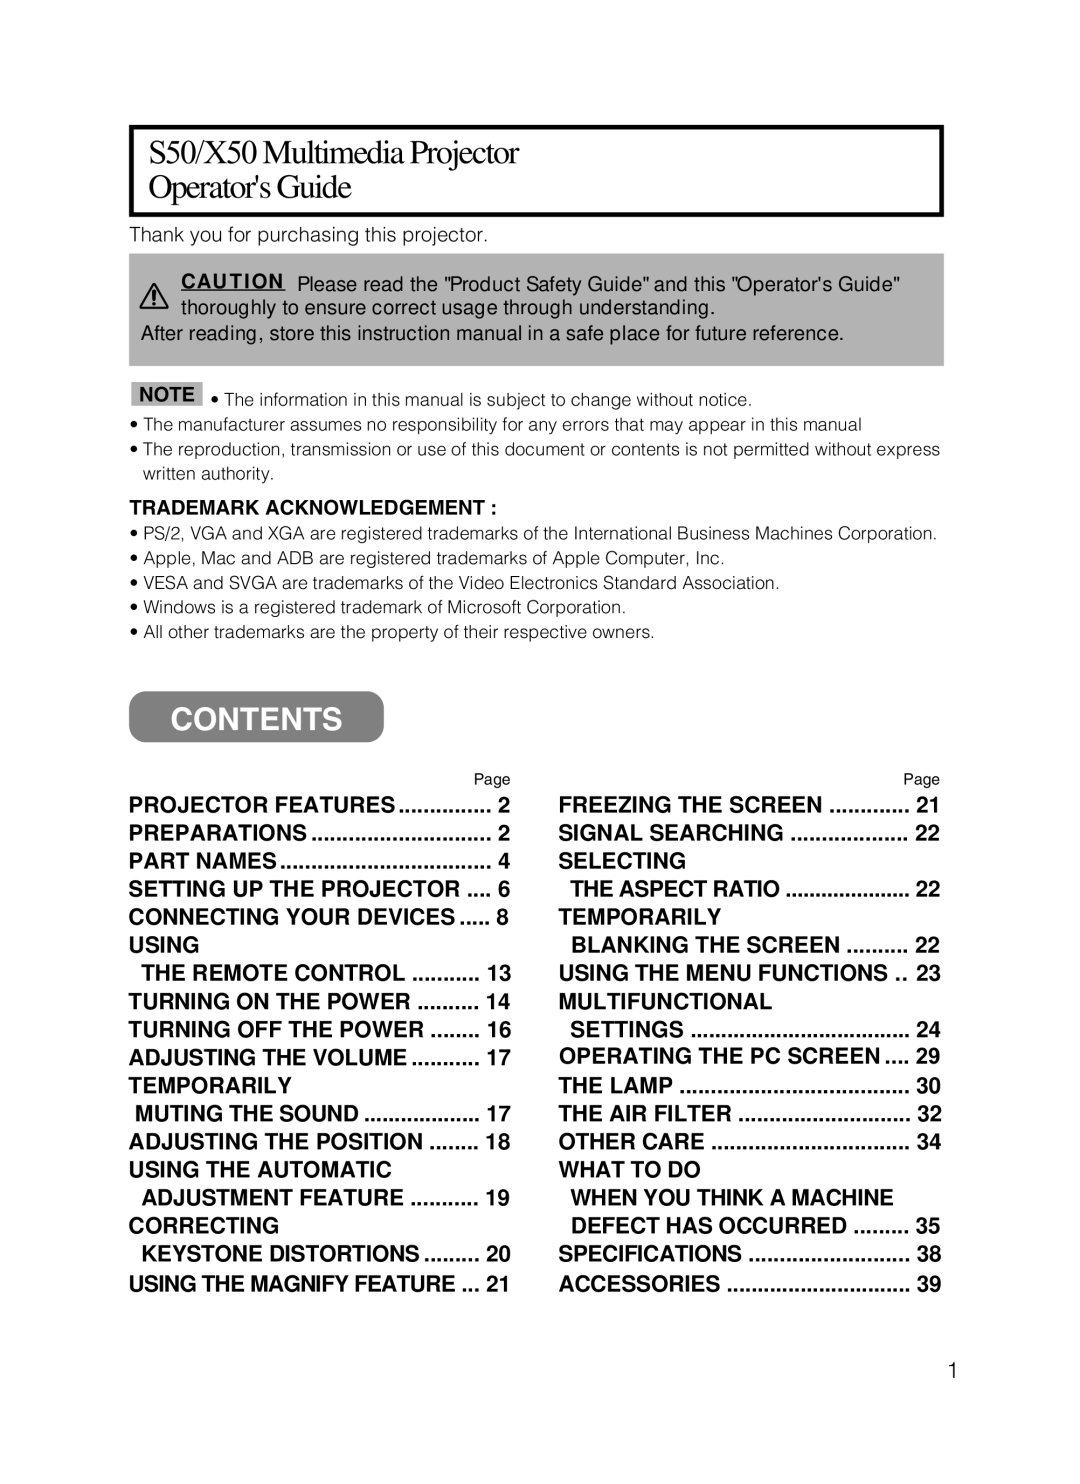 ViewSonic manual Contents, Operating The Pc Screen, S50/X50 Multimedia Projector Operators Guide 